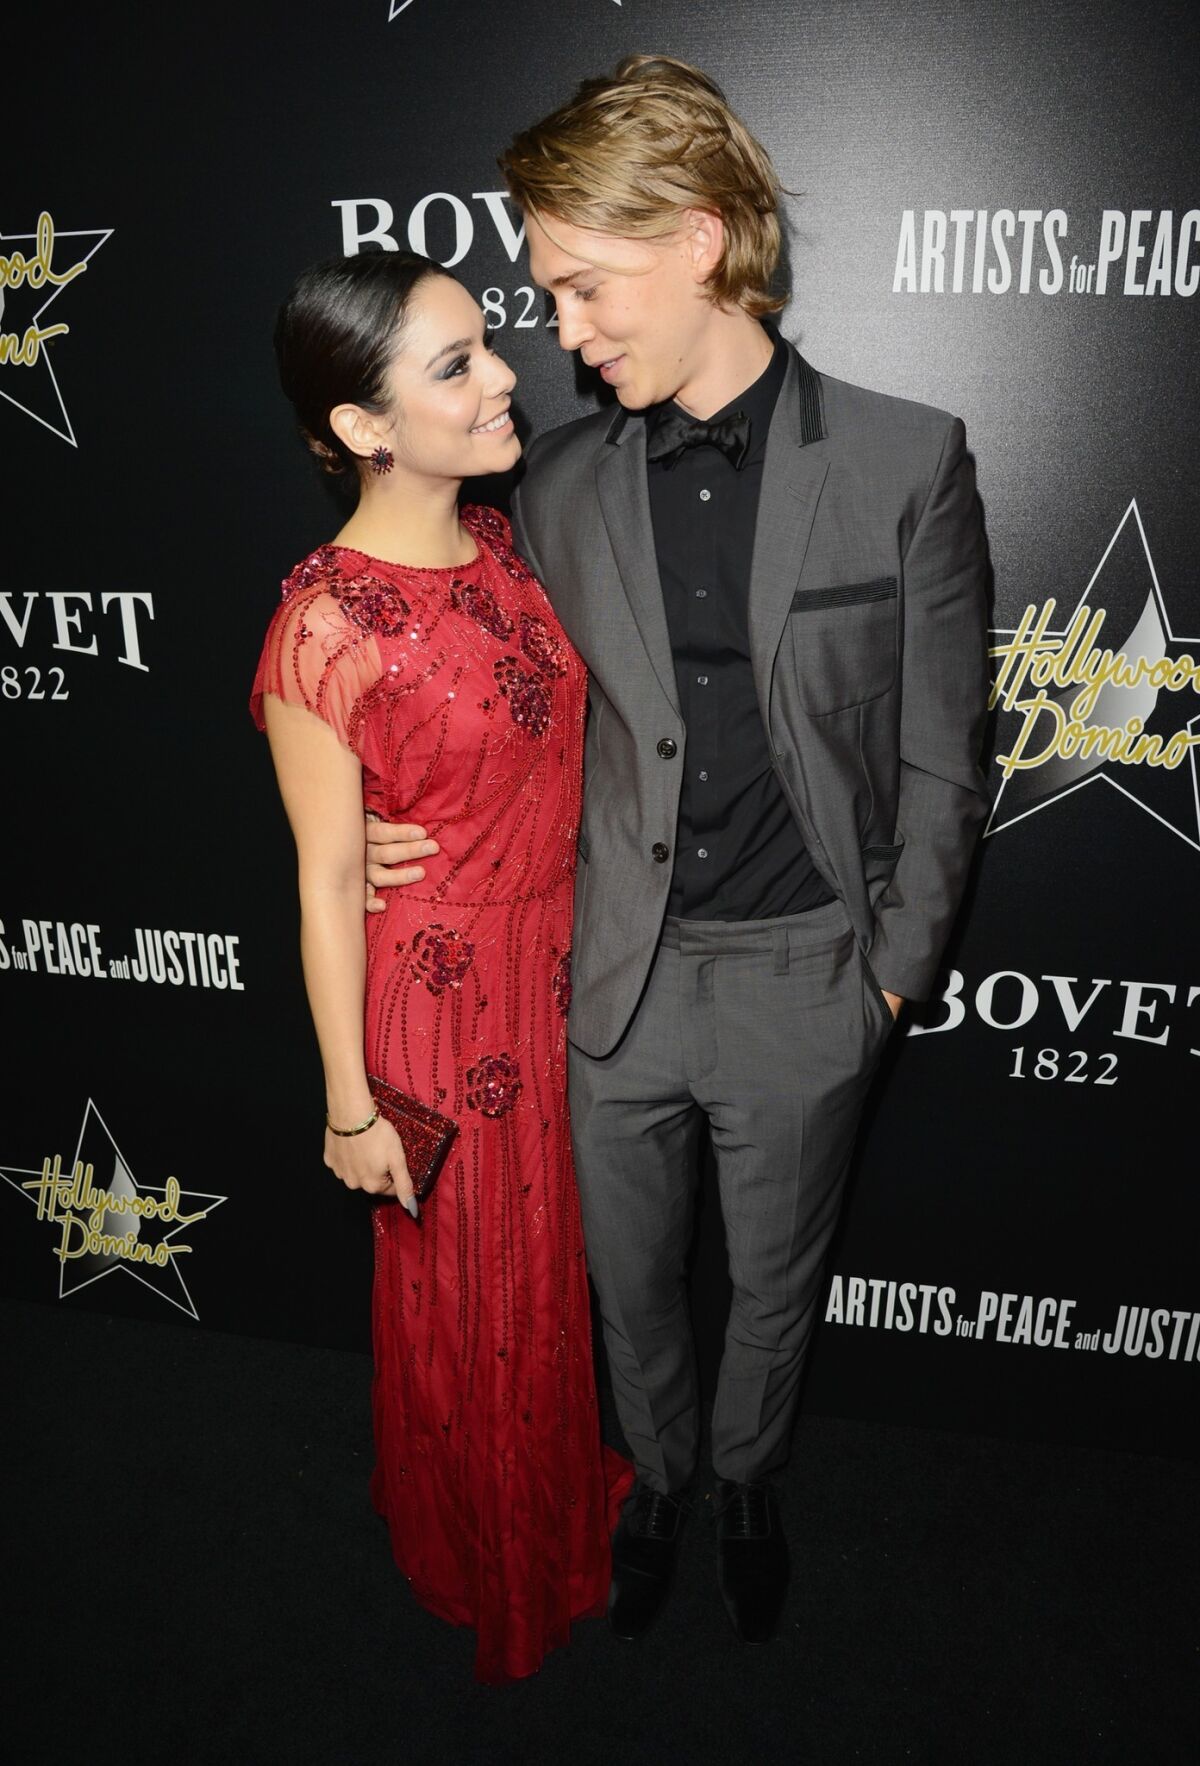 Actress Vanessa Hudgens and Austin Butler attend the seventh annual Hollywood Domino and Bovet 1822 Gala.